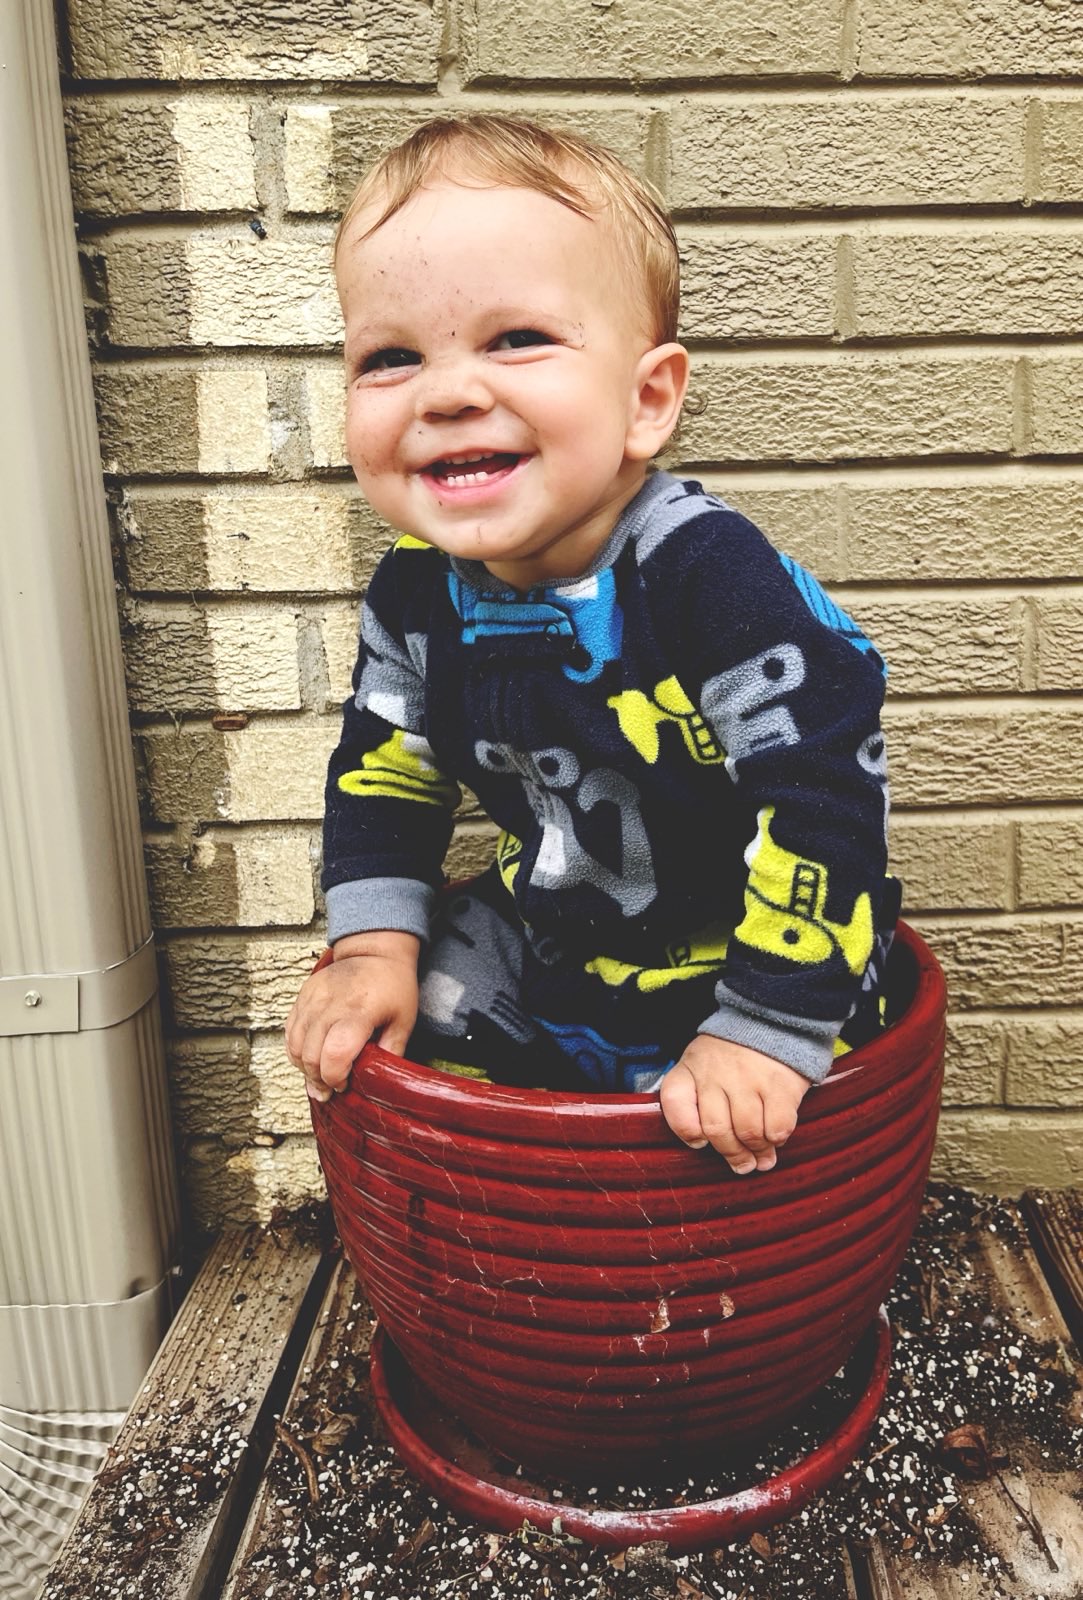 My baby playing in a large pot full of dirt